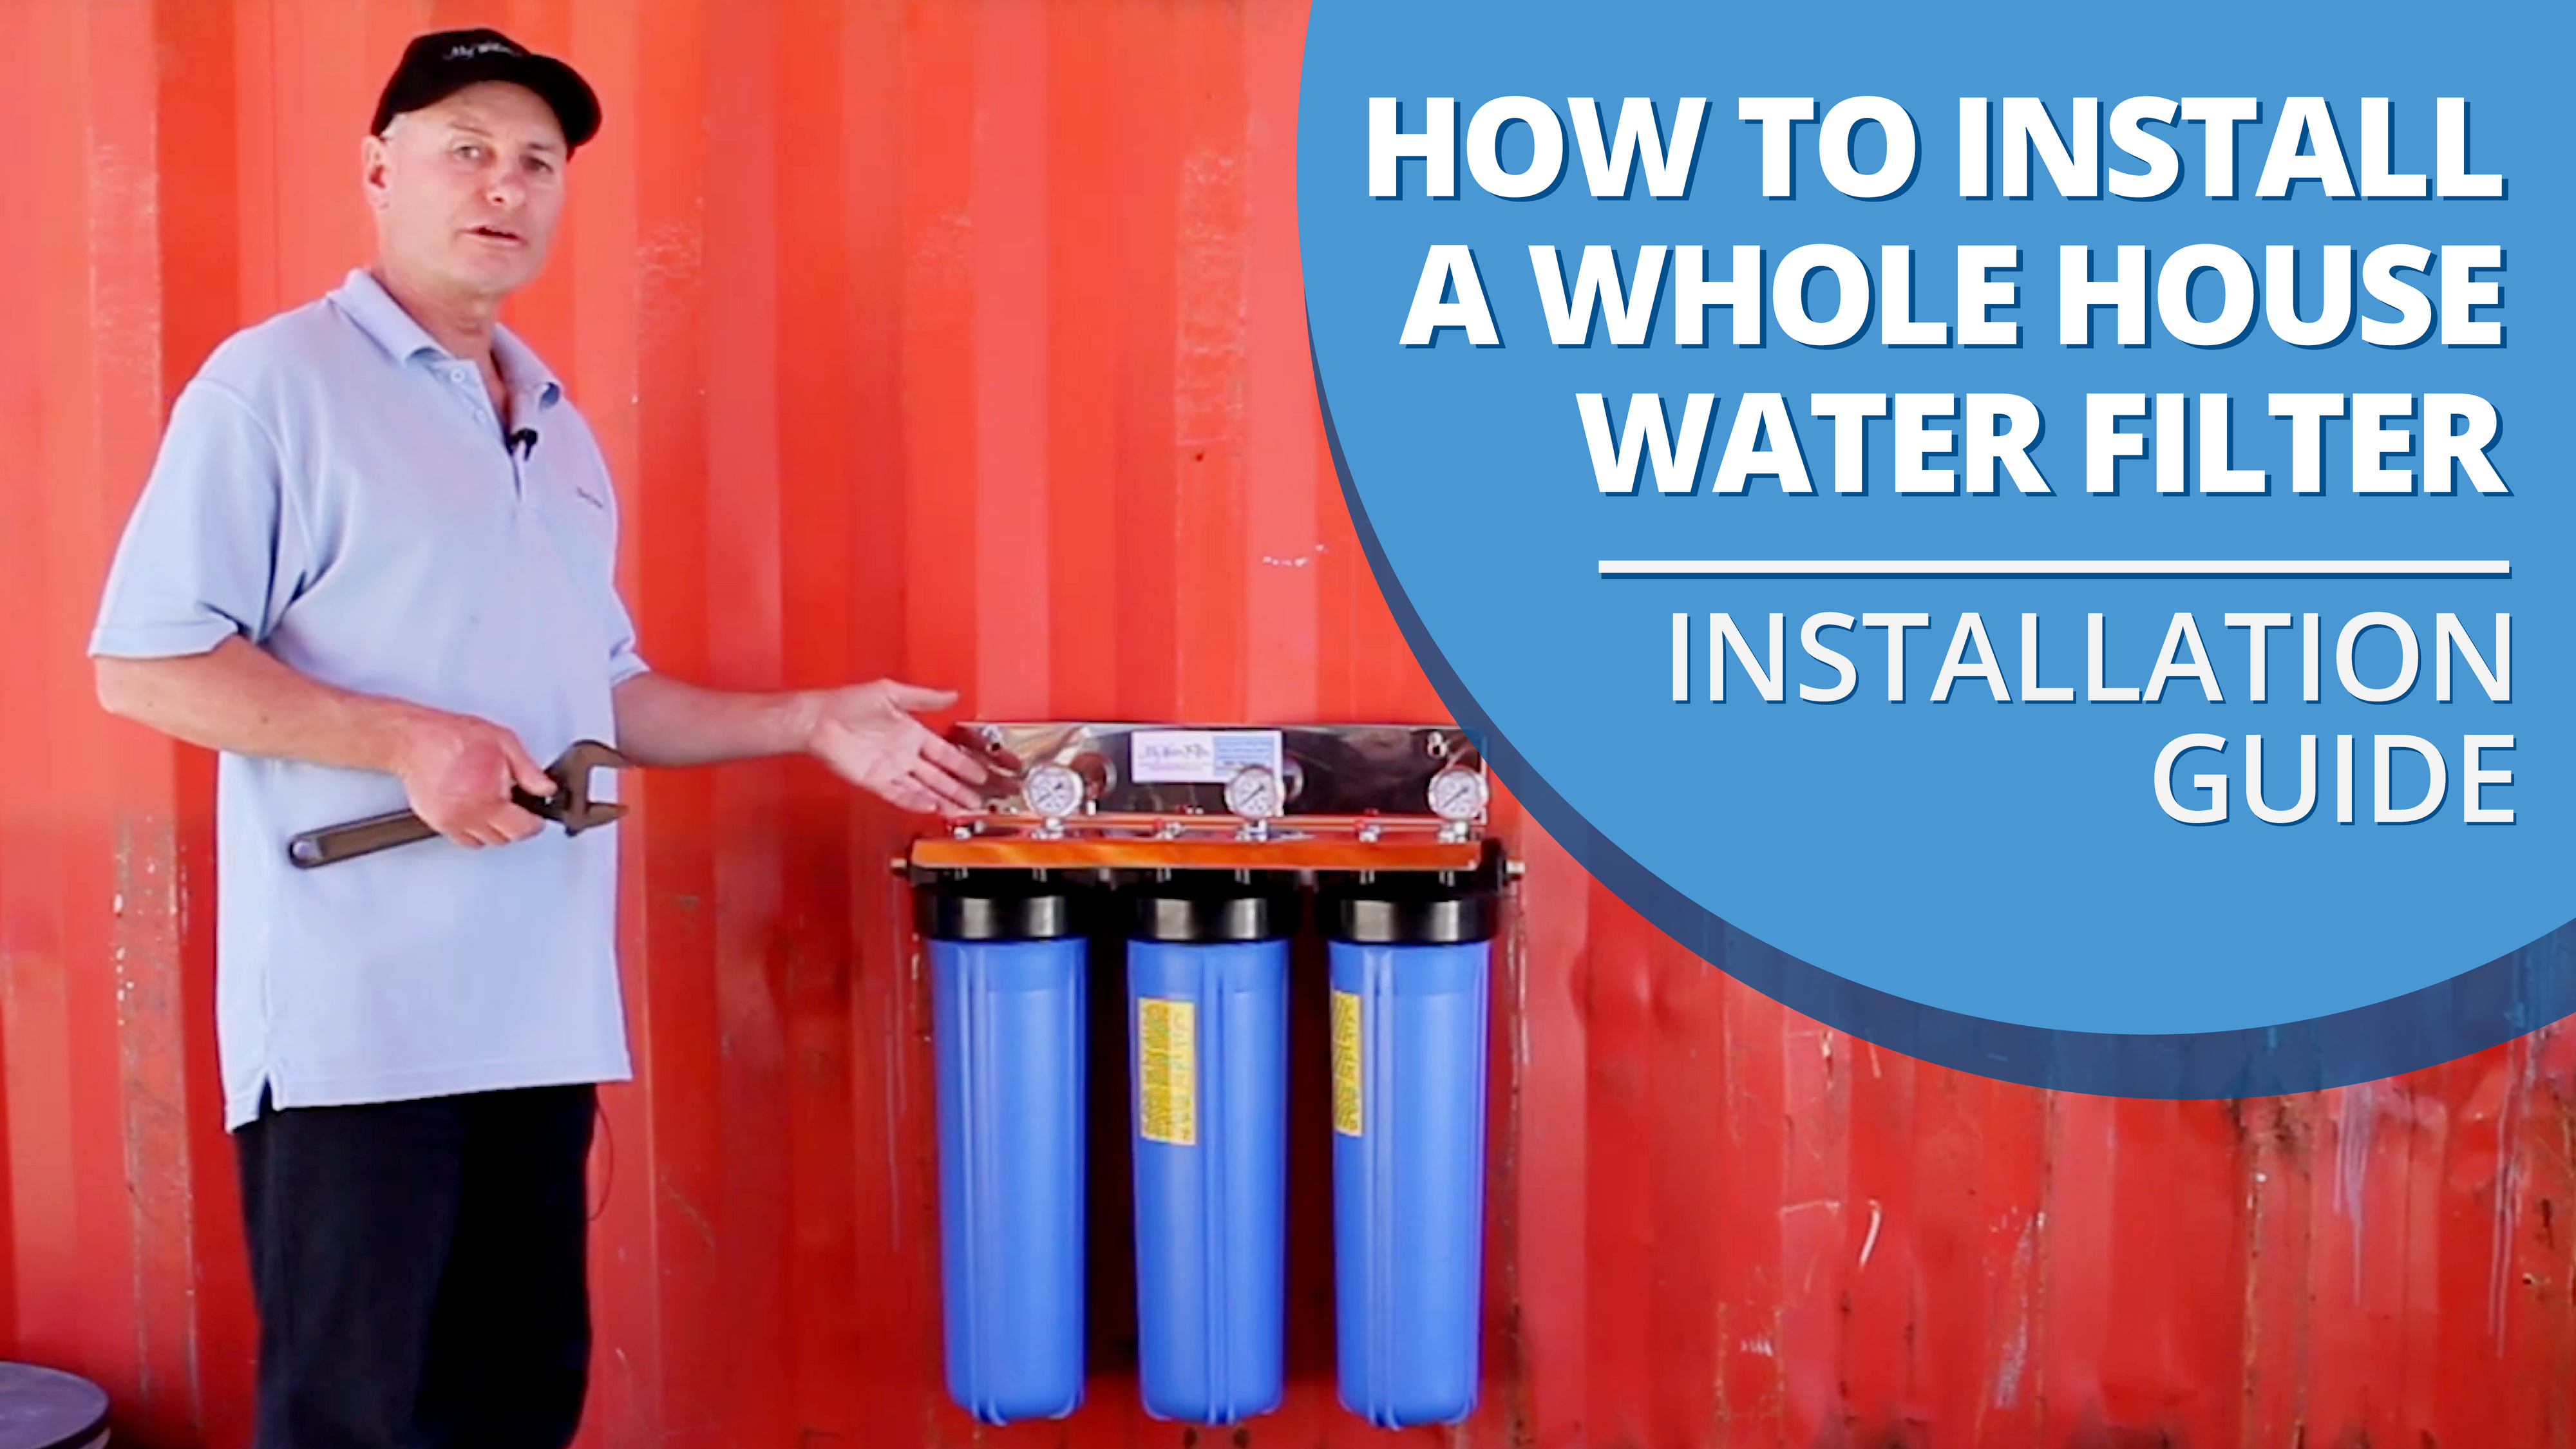 [VIDEO] How to Install a Whole House Water Filter